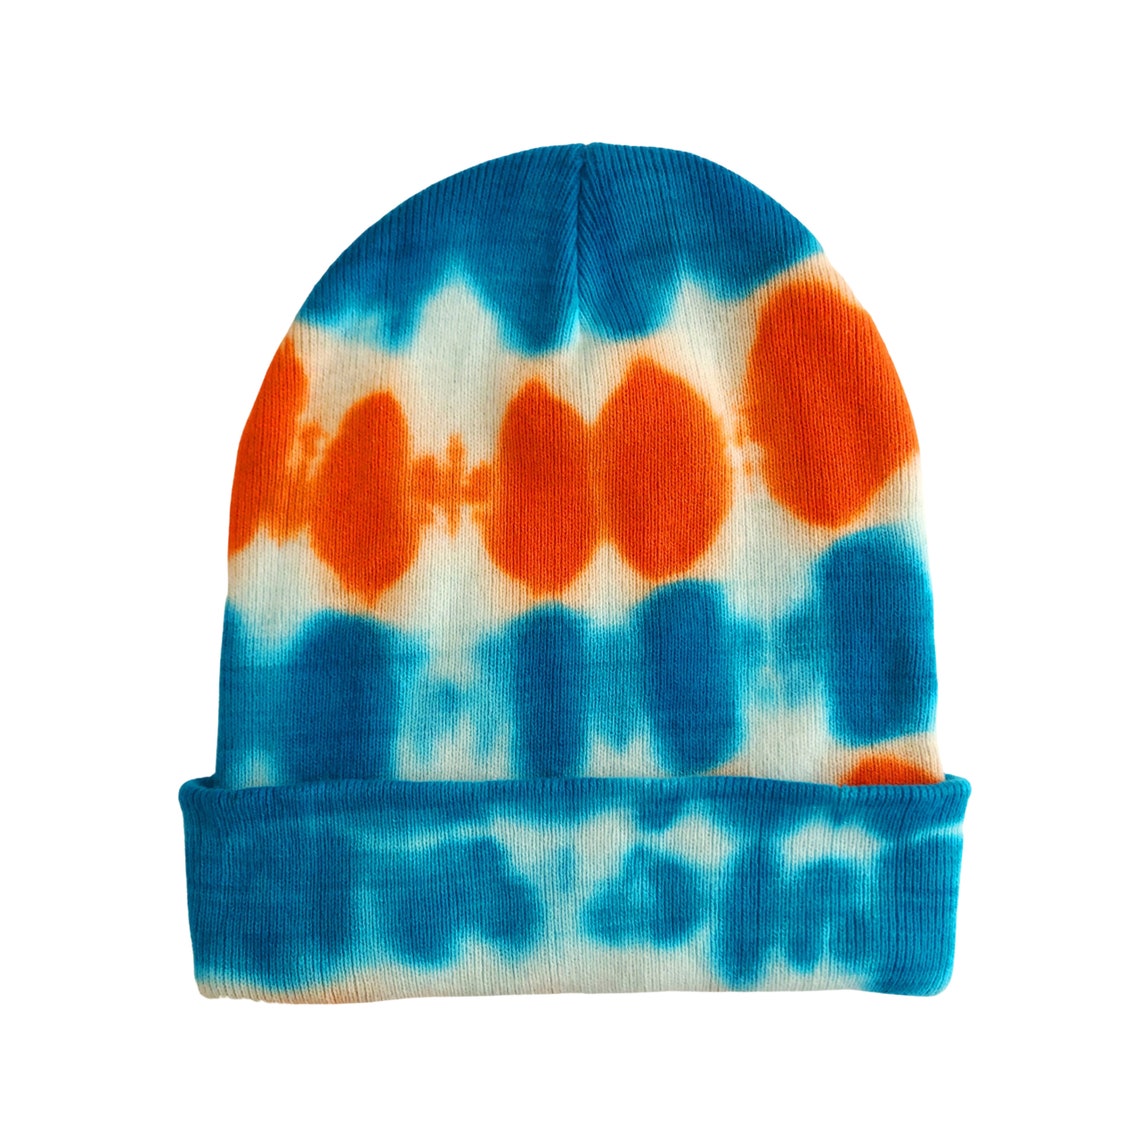 Tie Dye Beanie Hat for Men and Women, Turquoise and Orange - Etsy